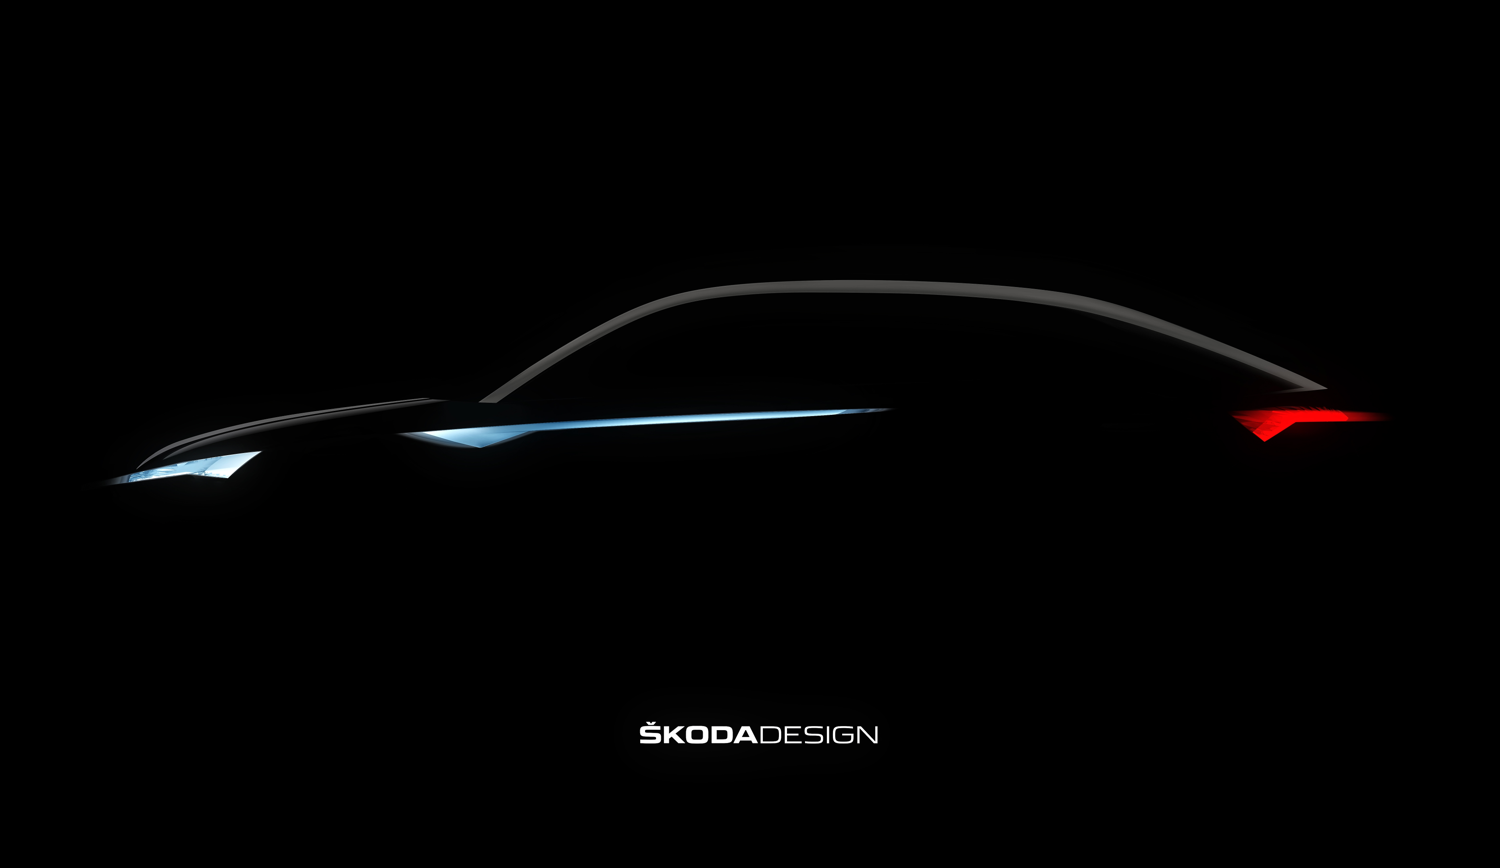 ŠKODA Design emphasises its commitment to a distinct design identity with continuous development of its design language.